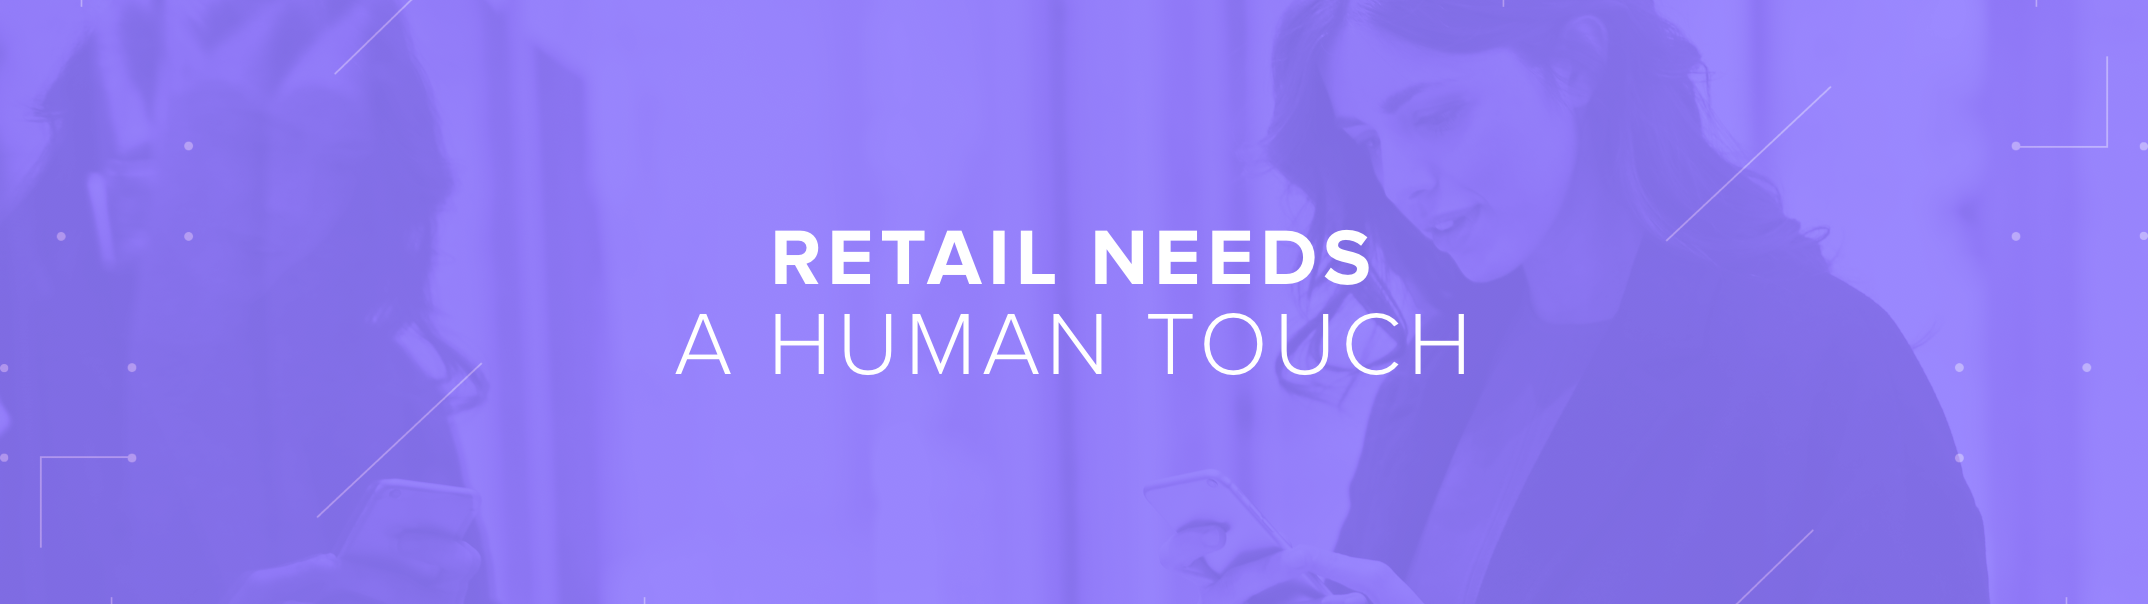 This is an image of a woman looking at her phone with the text "retail needs a human touch".